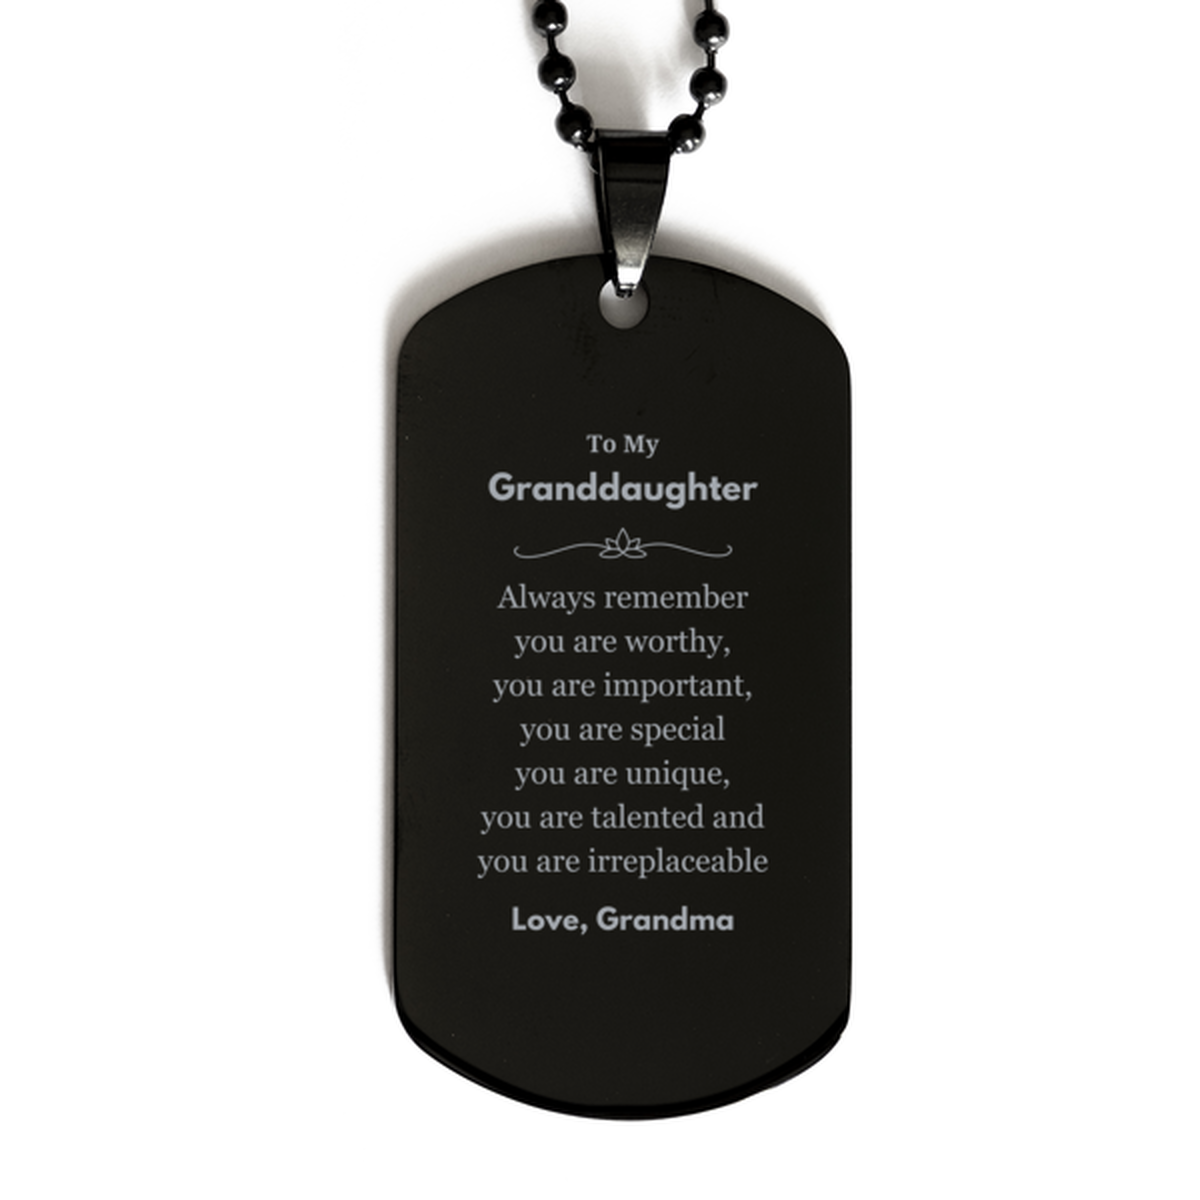 Granddaughter Birthday Gifts from Grandma, Inspirational Black Dog Tag for Granddaughter Christmas Graduation Gifts for Granddaughter Always remember you are worthy, you are important. Love, Grandma